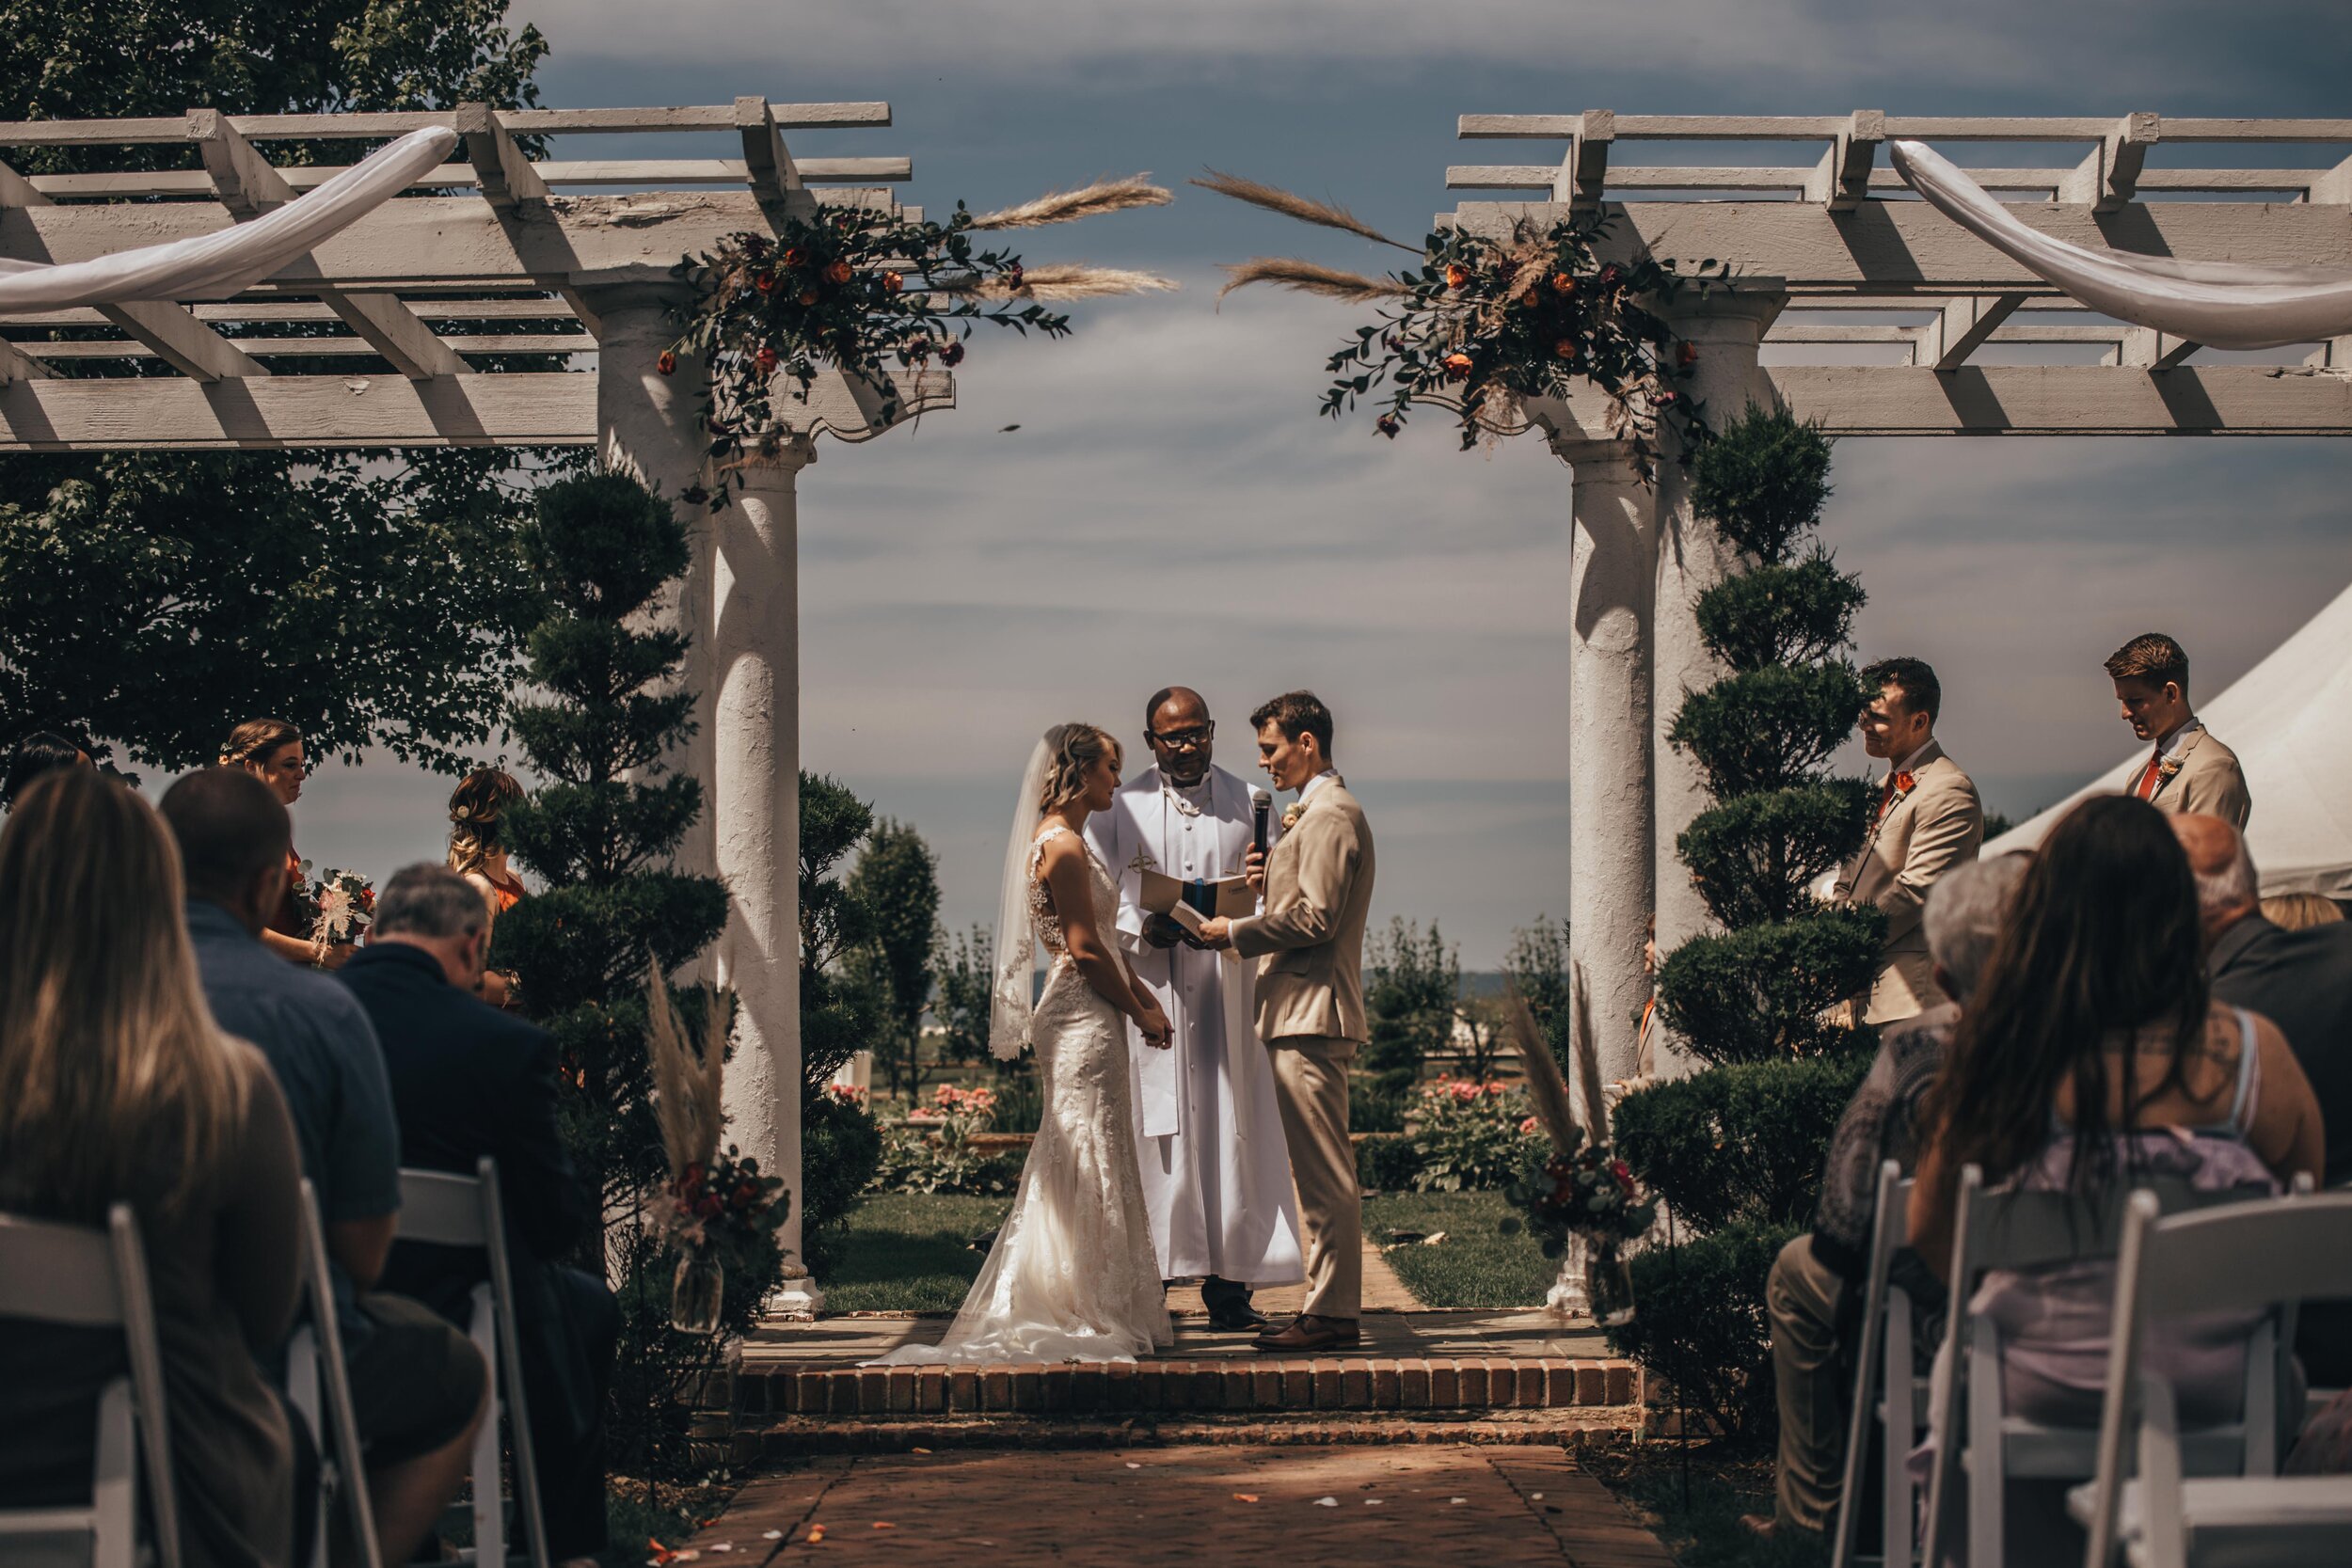 Faced with having to cancel their original plans, Alexia and CJ re-planned their wedding day in just three months. Opting for a romantic micro wedding in the bride’s parent’s backyard in New Ringgold, Pennsylvania. Photographed by Sarah Brookhart Ph…